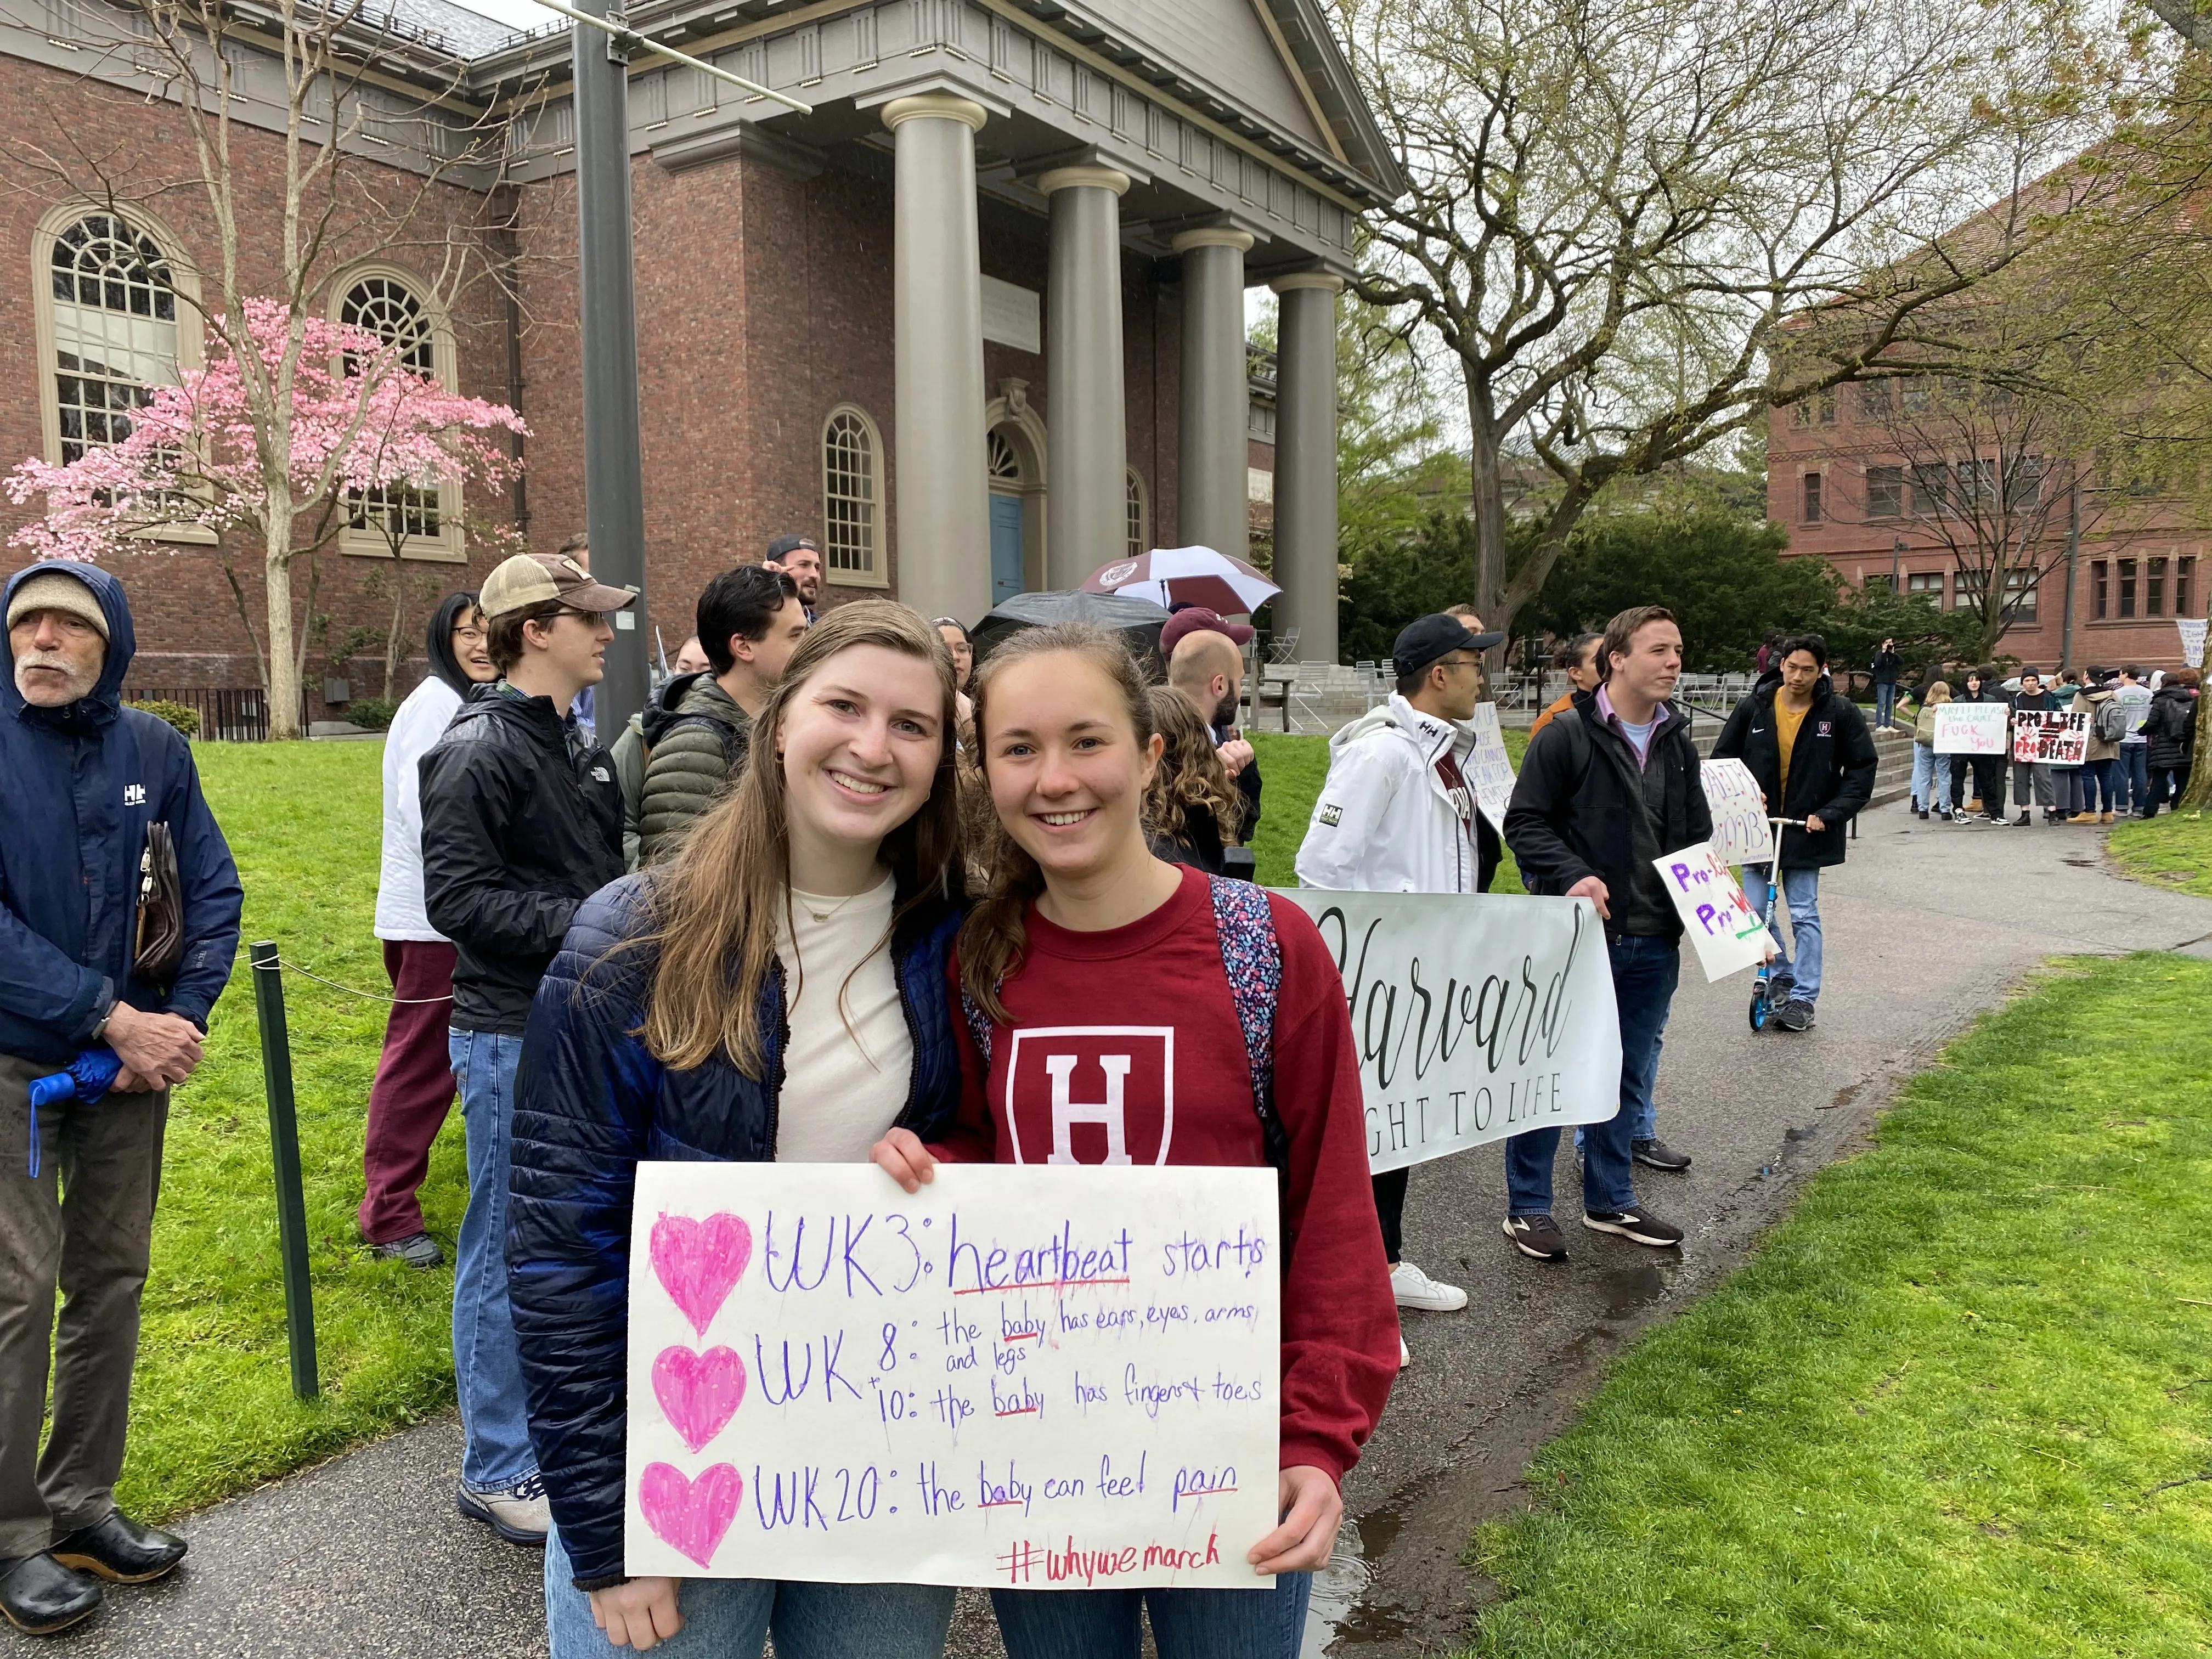 Co-chairs of Harvard Right to Life, Olivia Glunz (right) and Ava Swanson (left) led a pro-life demonstration on Harvard University's campus on May 4, 2022, in response to a pro-abortion rally on campus.?w=200&h=150